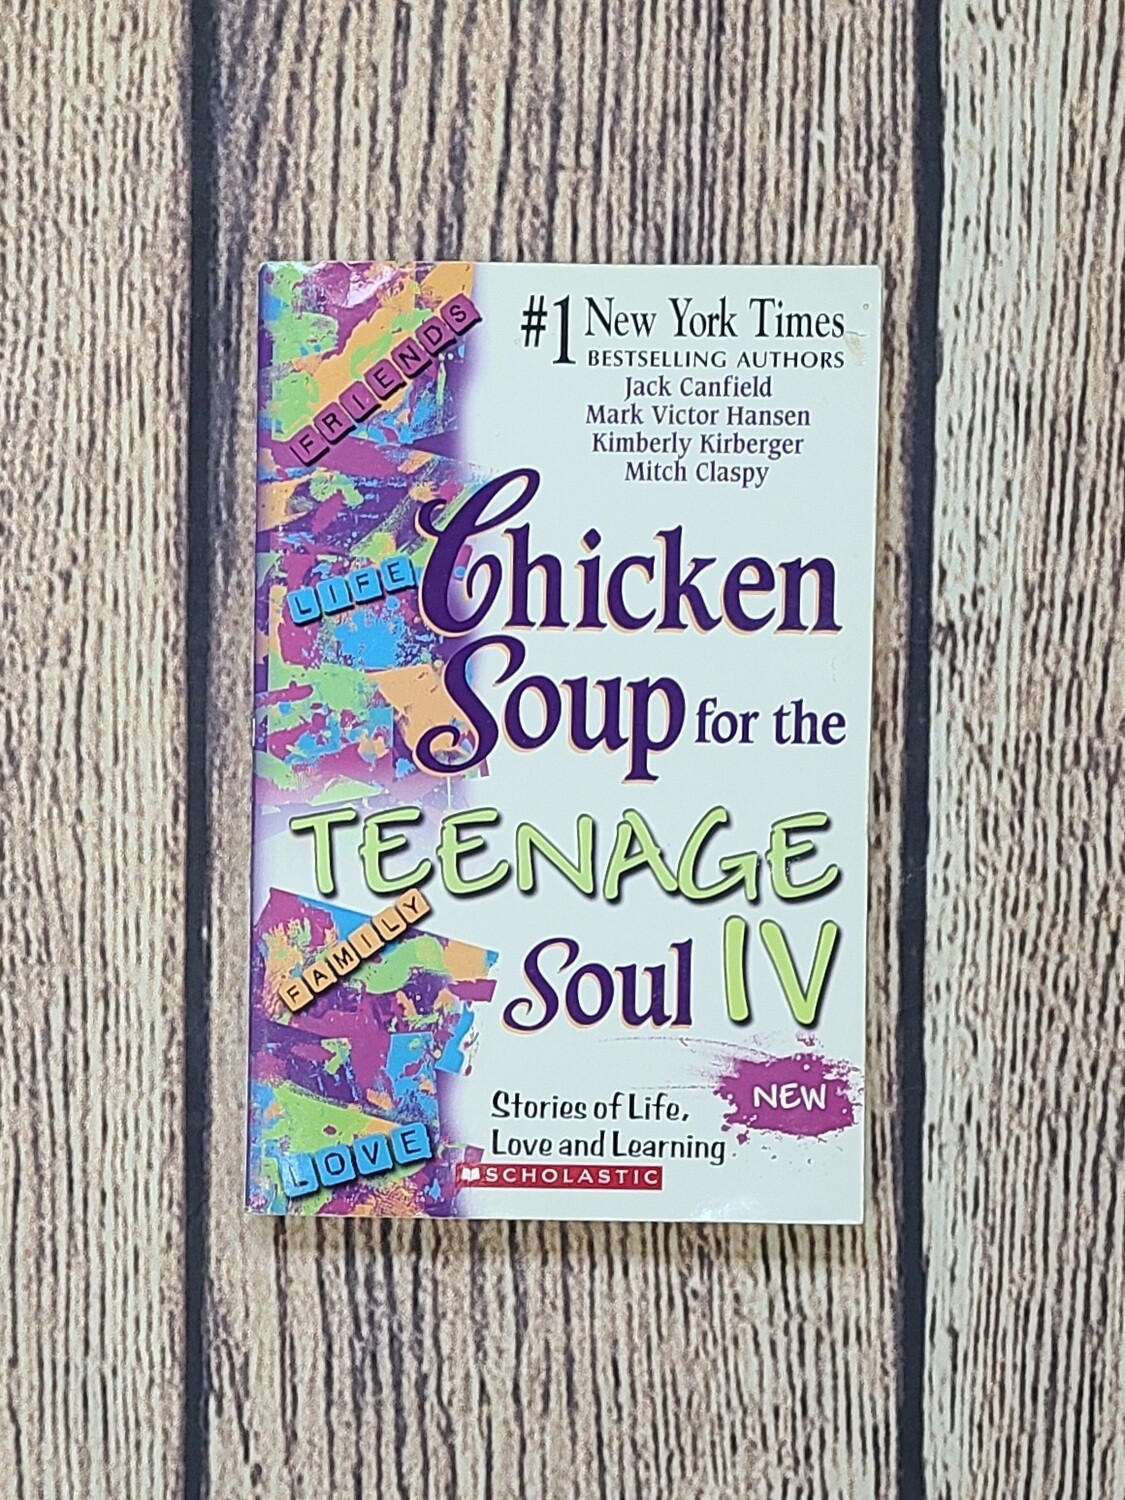 Chicken Soup for the Teenage Soul IV by Jack Canfield, Mark Victor Hansen, Kimberly Kirberger, and Mitch Claspy